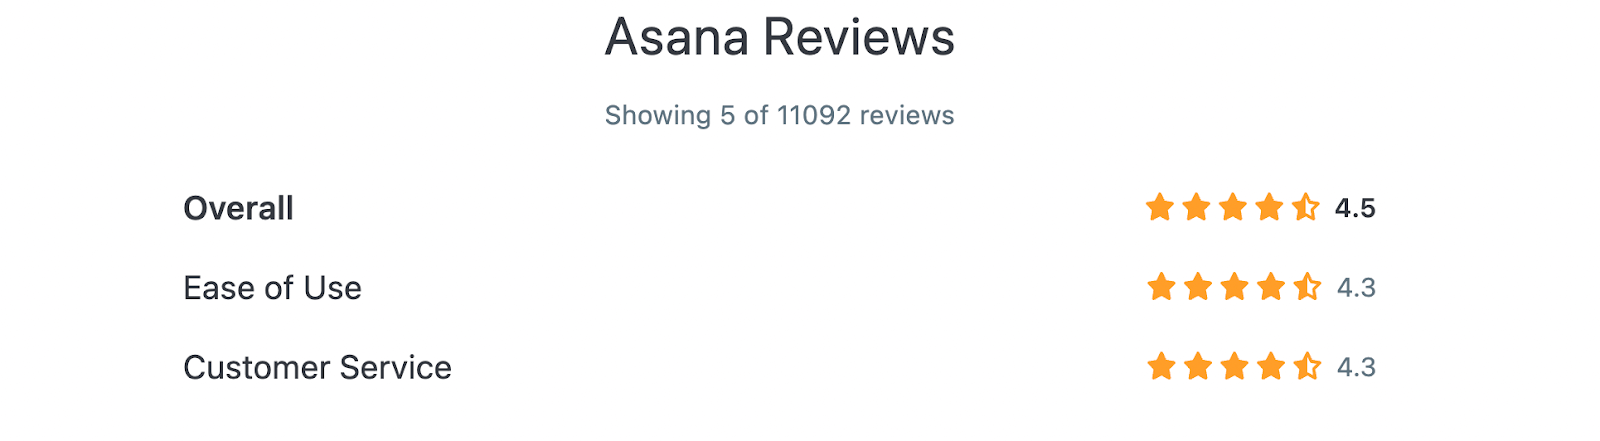 Asana reviews on Capterra (Overall: 4.5, Ease of Use: 4.3, Customer Service: 4.3)